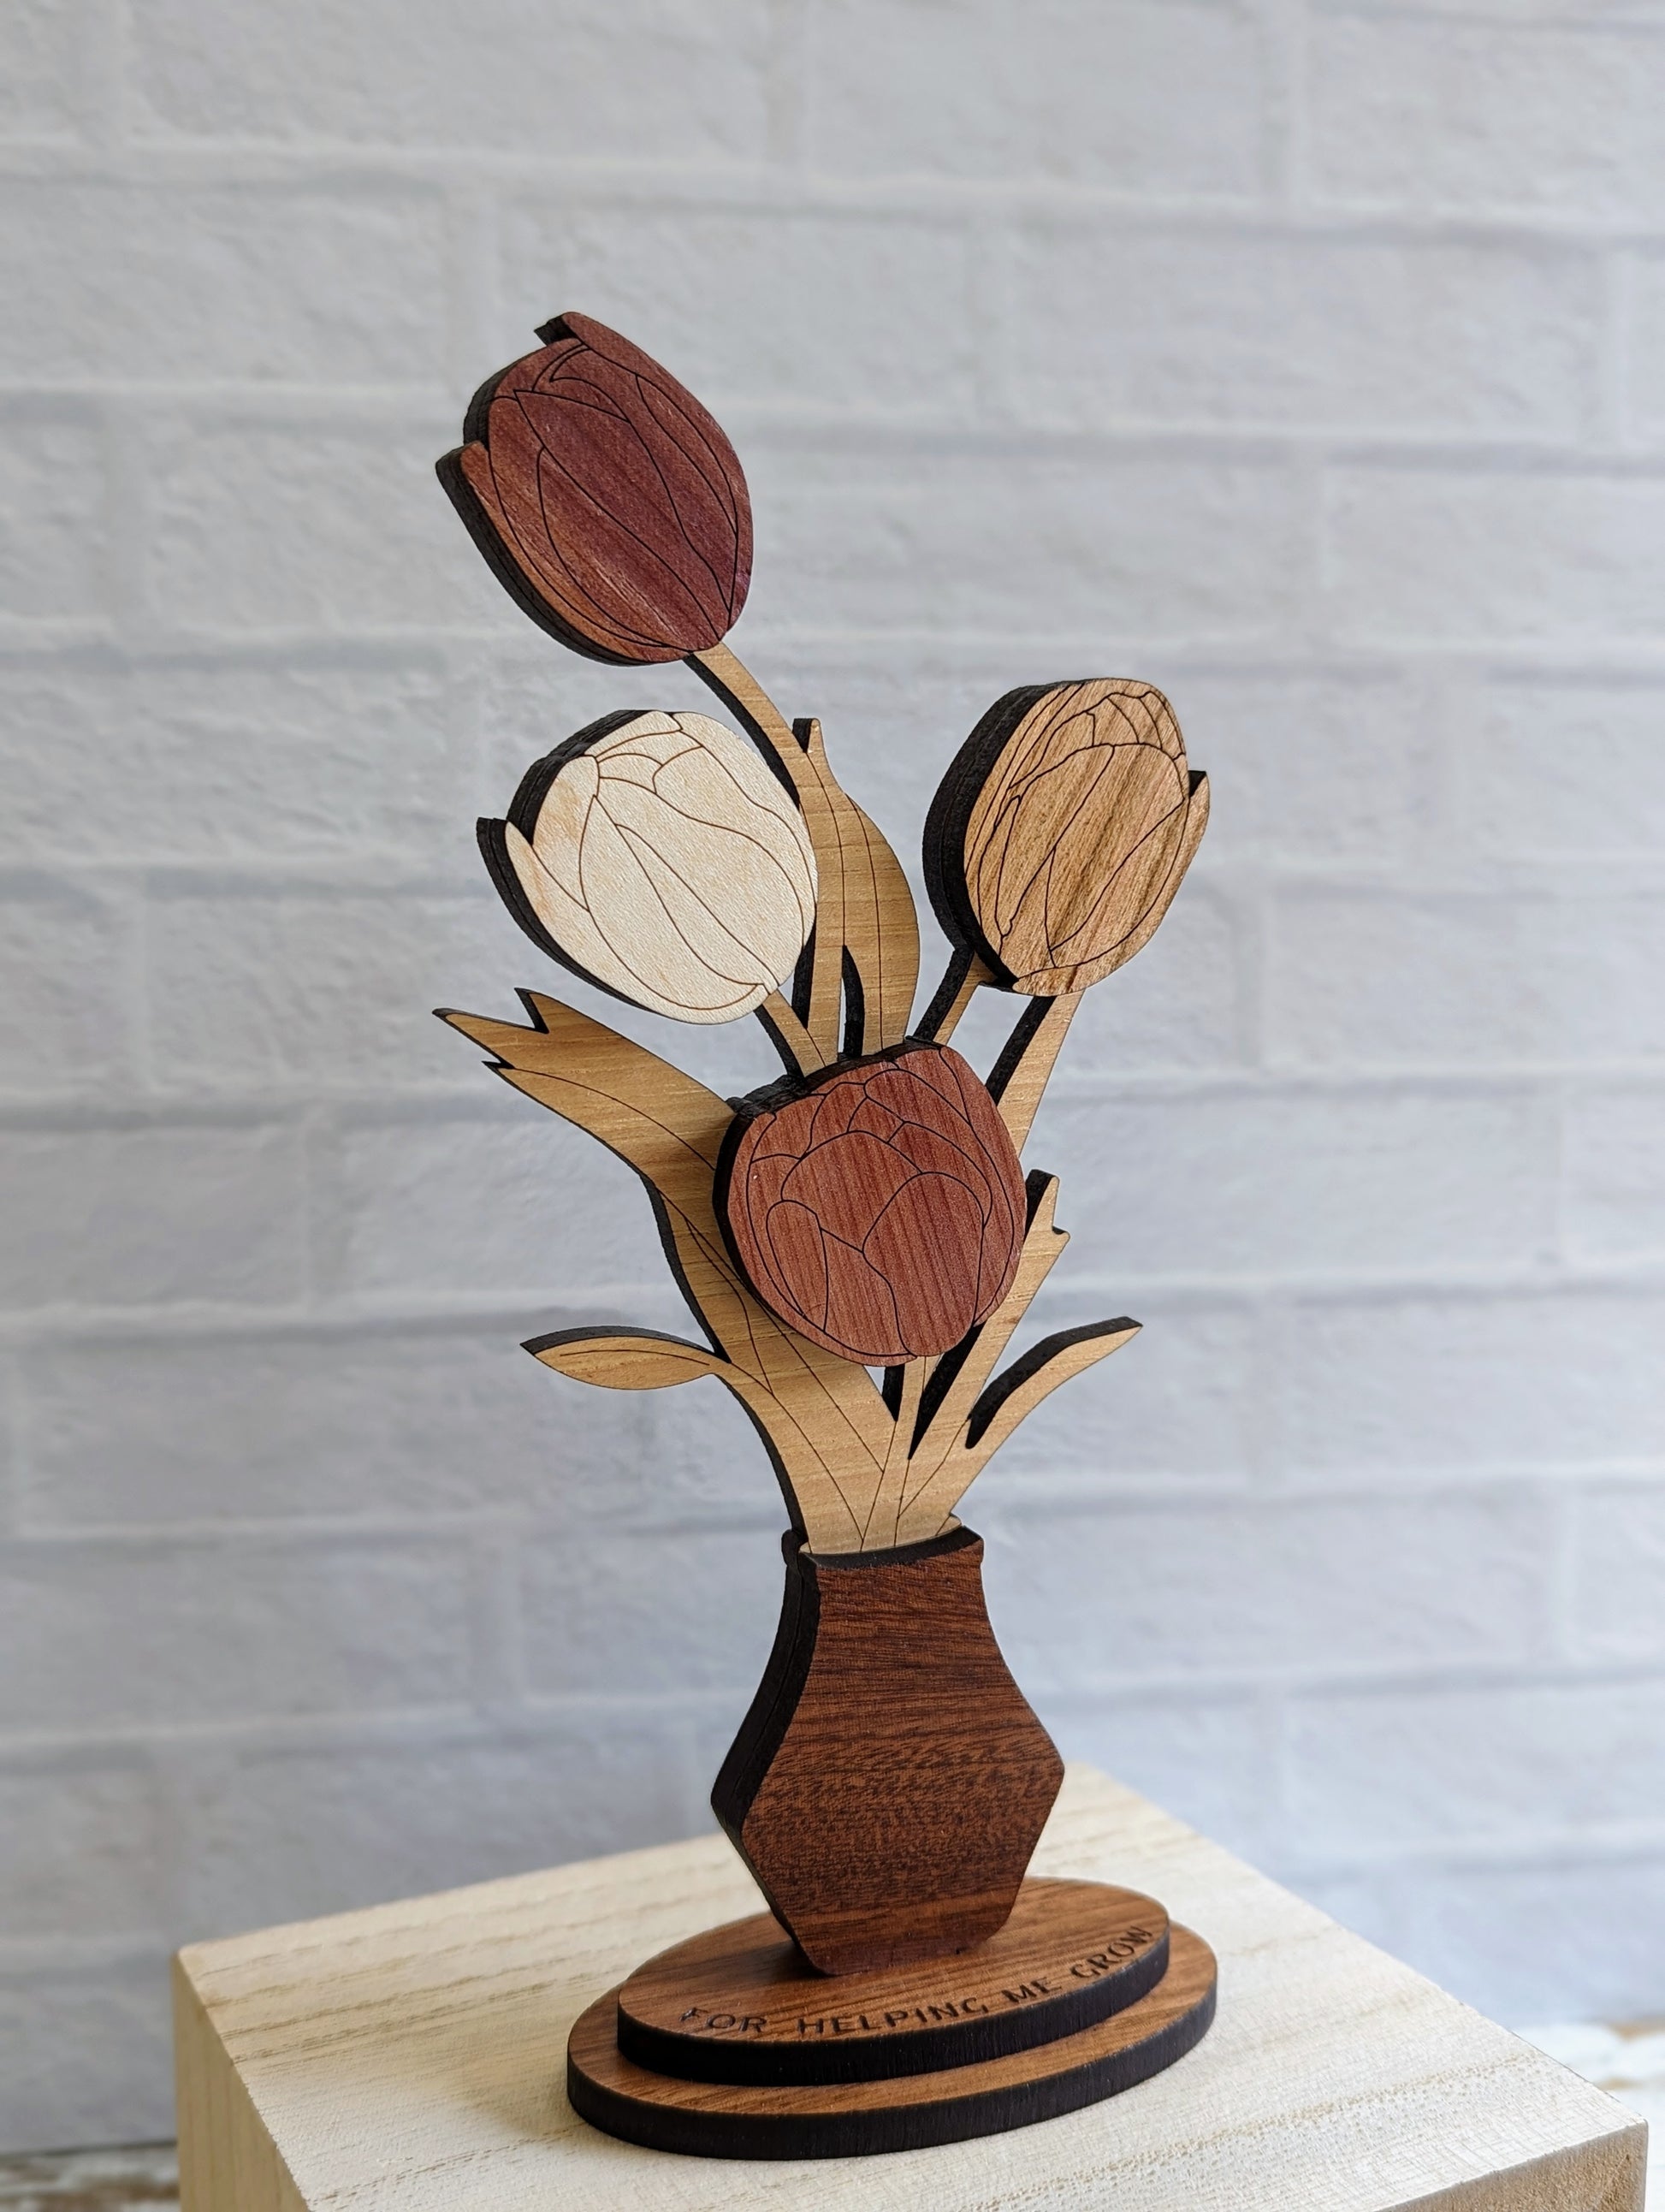 Everlasting Blooms: Handcrafted wooden tulip floral bouquet for gift giving